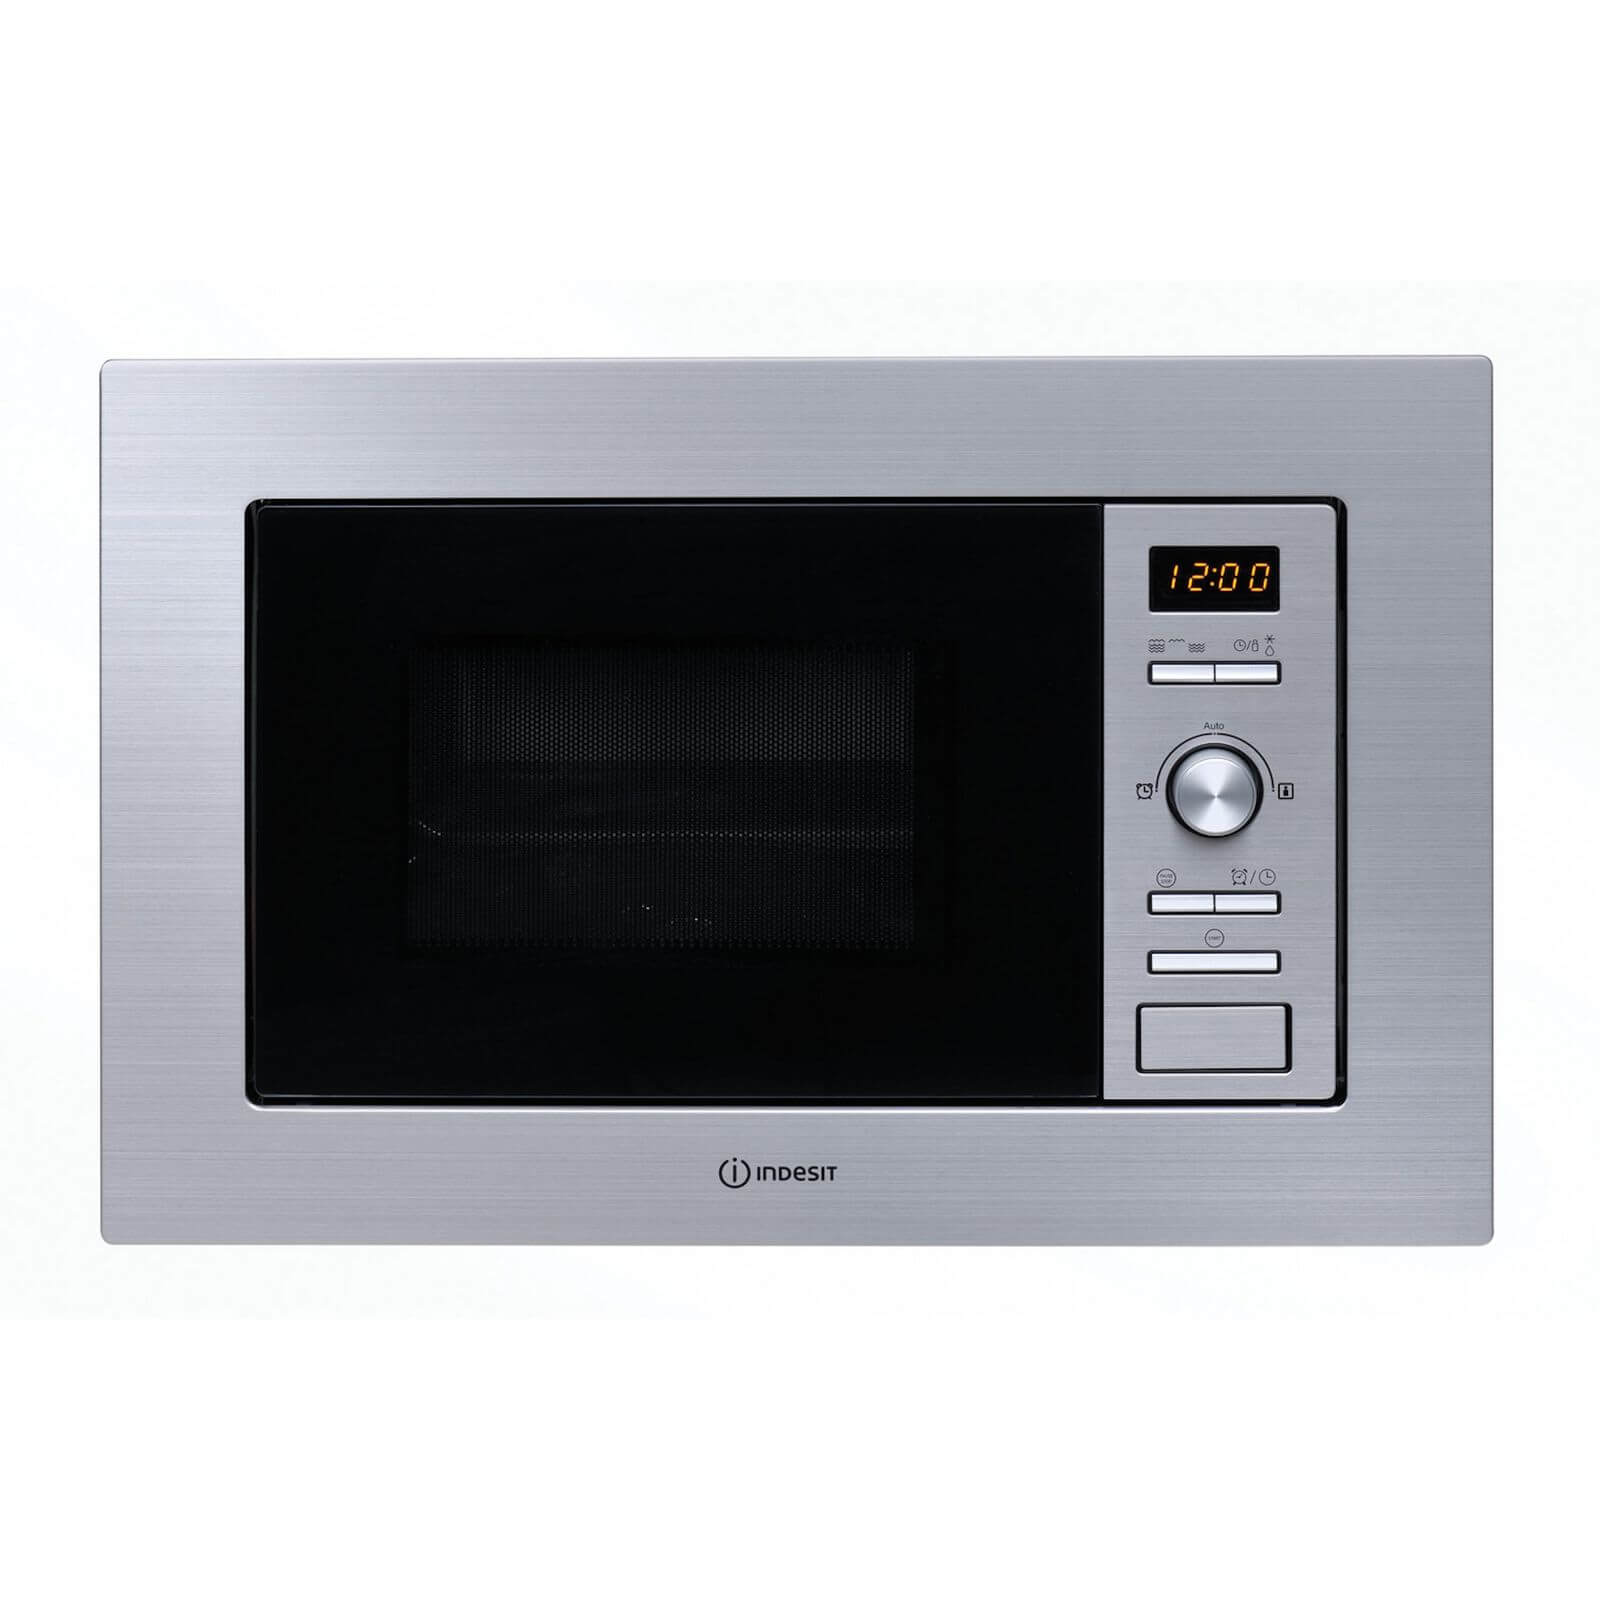 Indesit MWI122.2X UK Built-in Microwave Grill - Stainless Steel